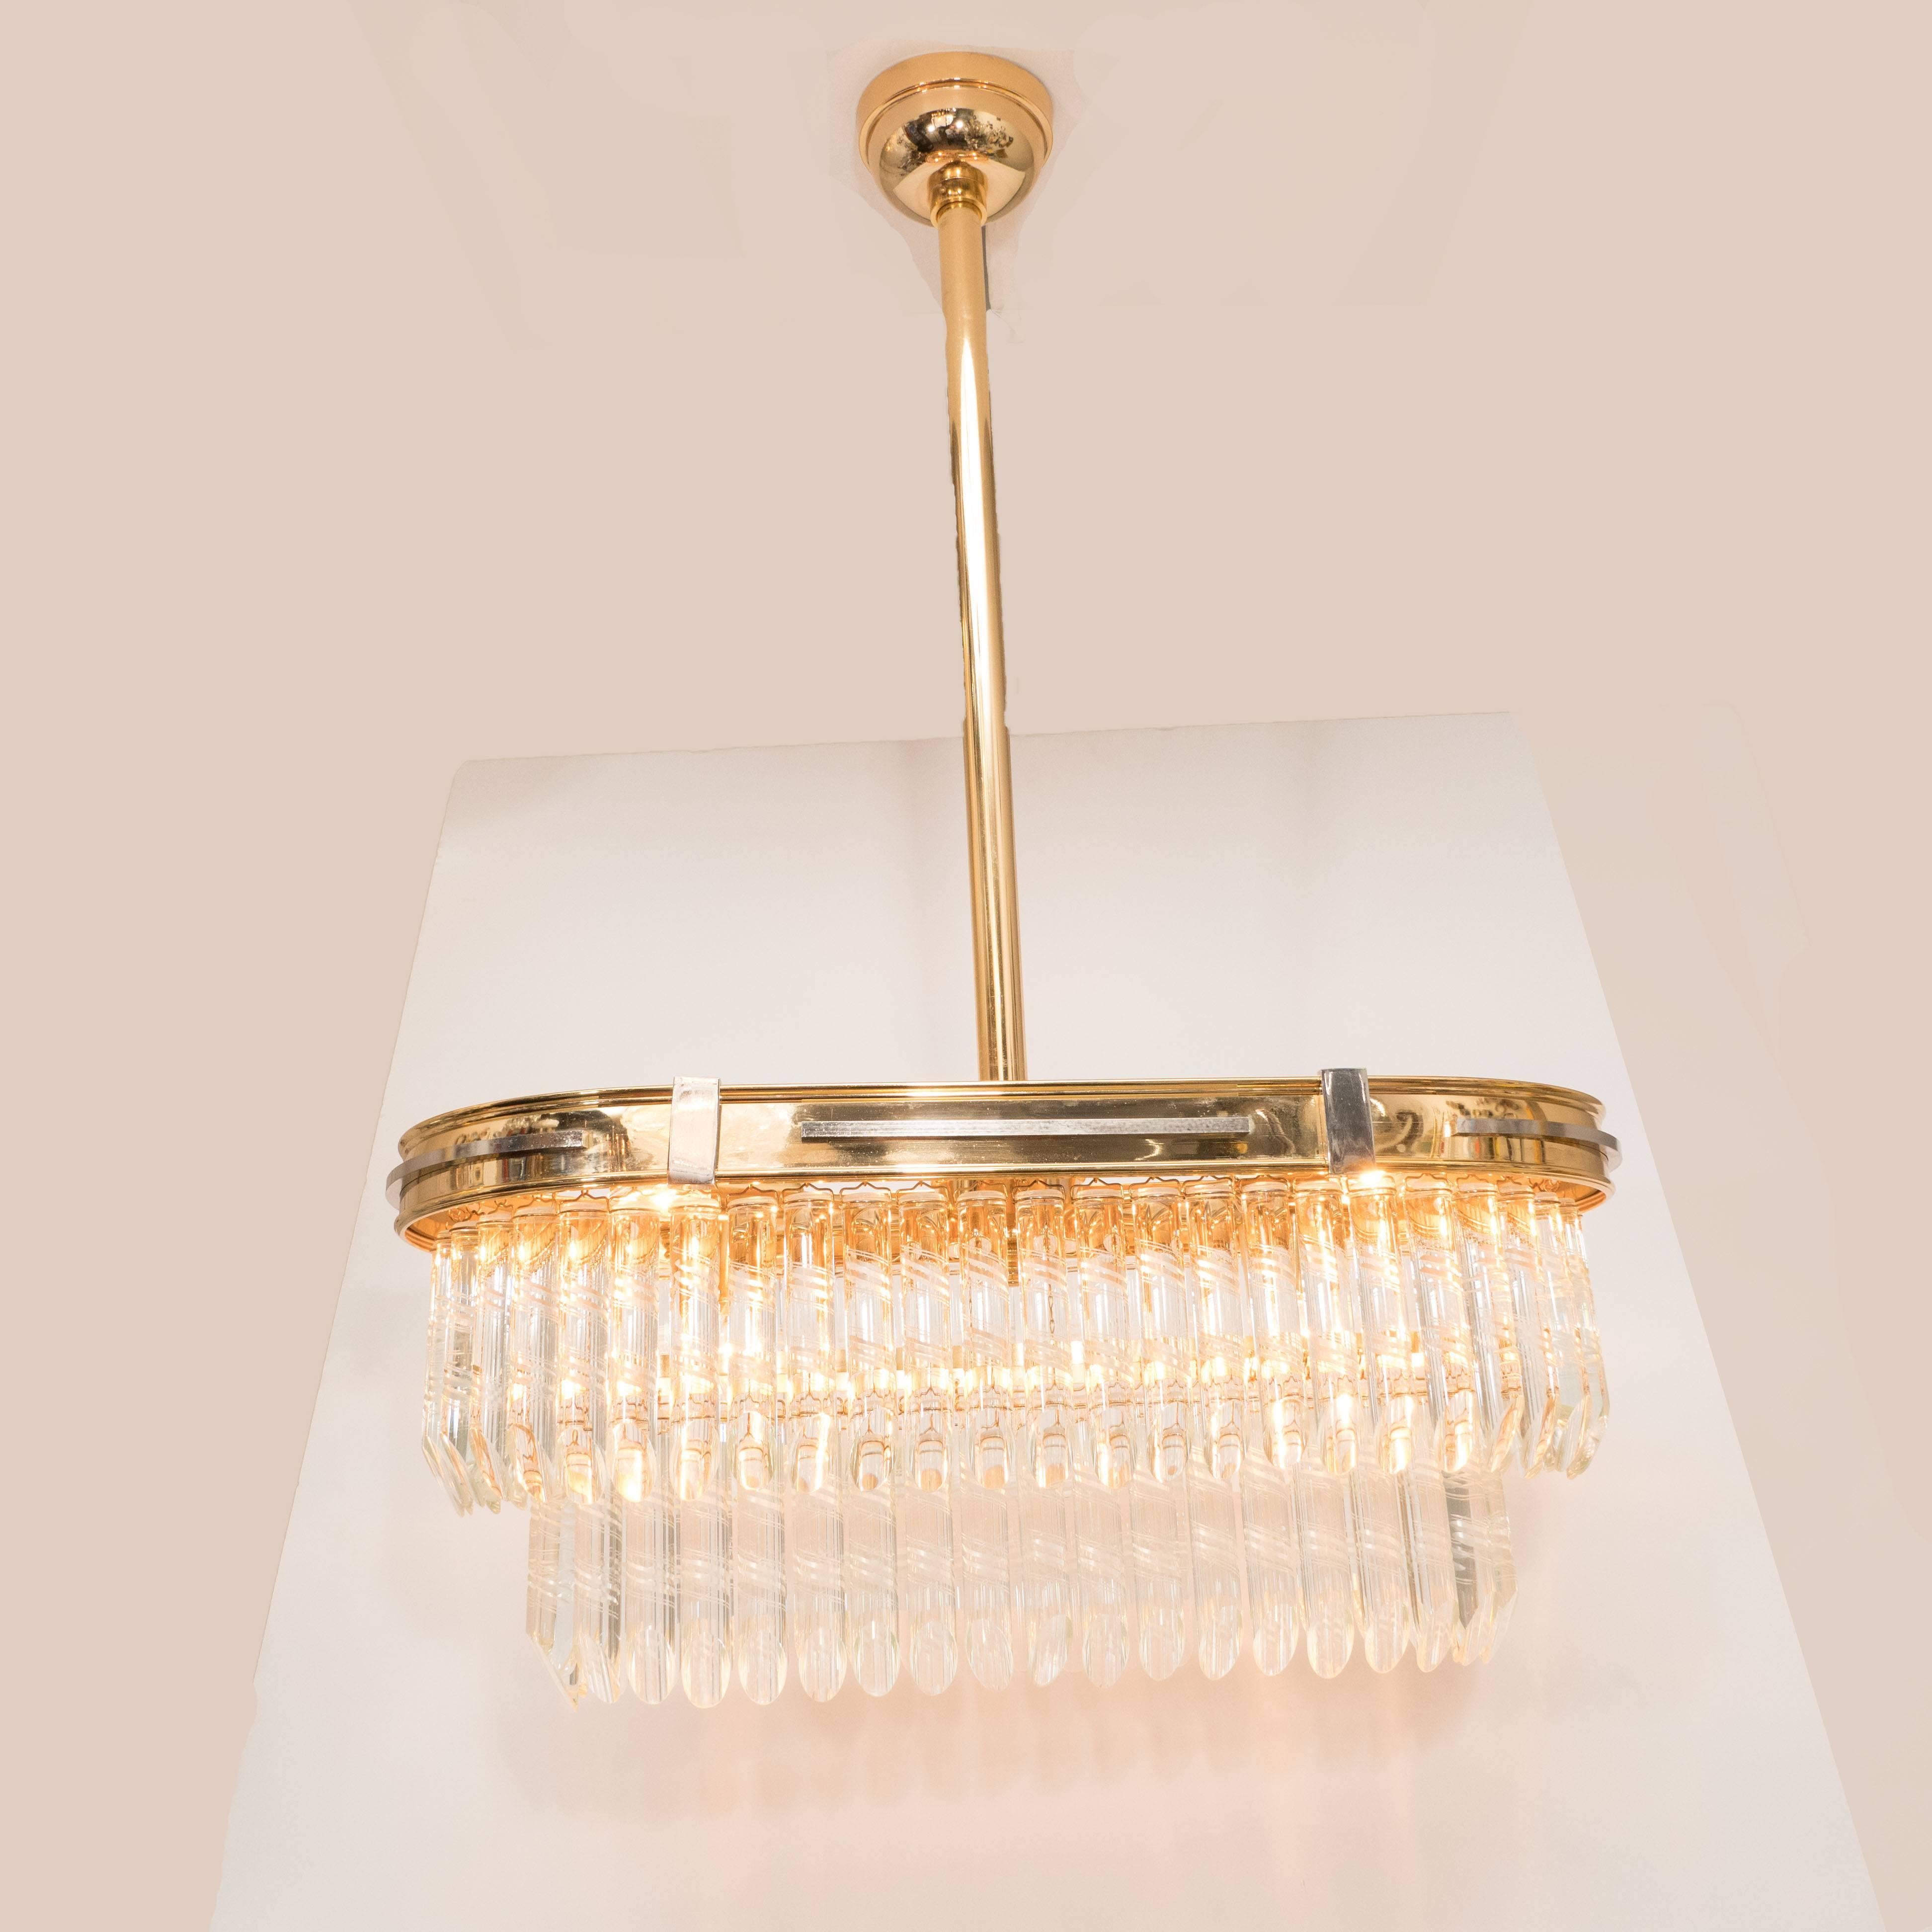 Mid-Century Modern Oblong brass and nickel chandelier with cut-crystals. This stunning and refined Mid-Century Modern chandelier was realized in Italy, circa 1970. It features an oblong streamlined frame- resembling the form of a racetrack- in brass